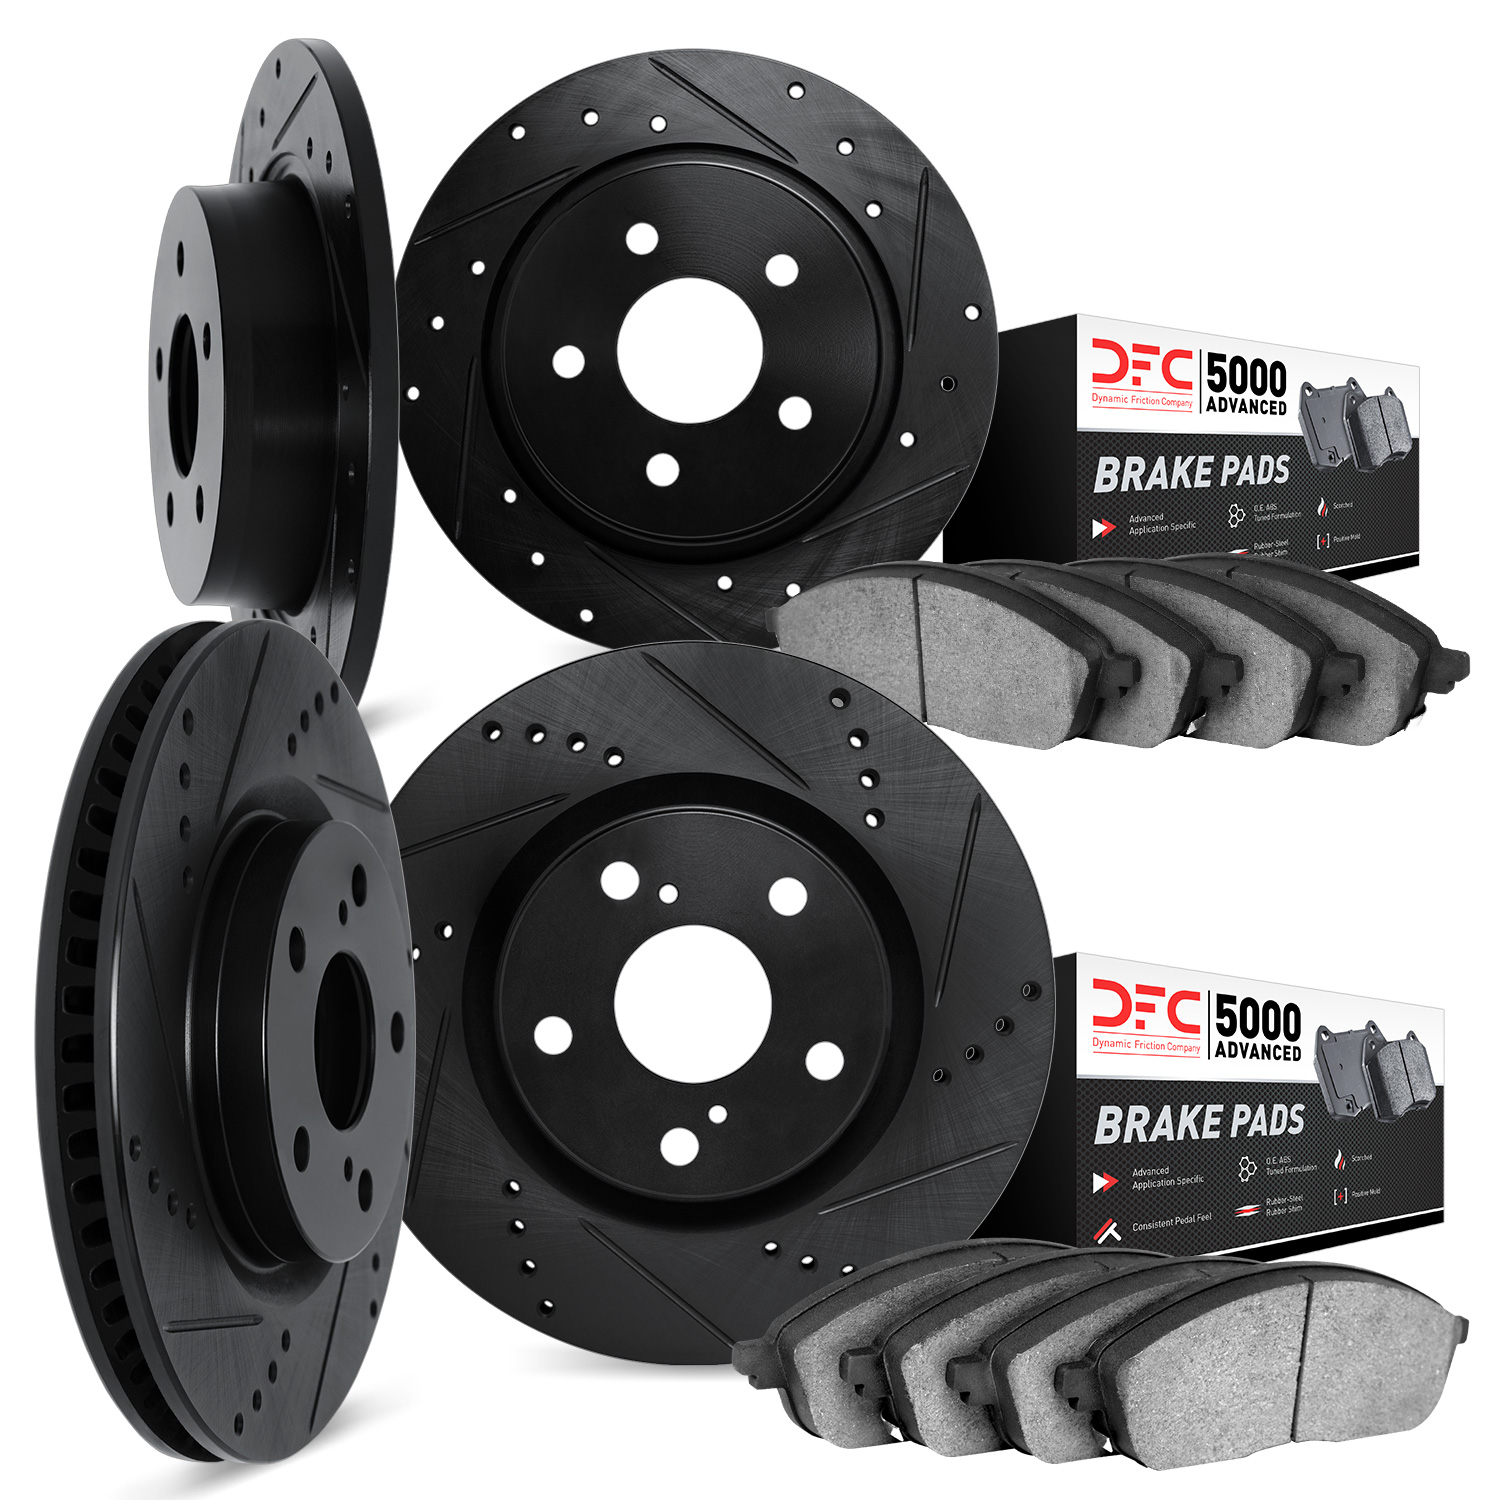 8504-76153 Drilled/Slotted Brake Rotors w/5000 Advanced Brake Pads Kit [Black], 2002-2003 Lexus/Toyota/Scion, Position: Front an